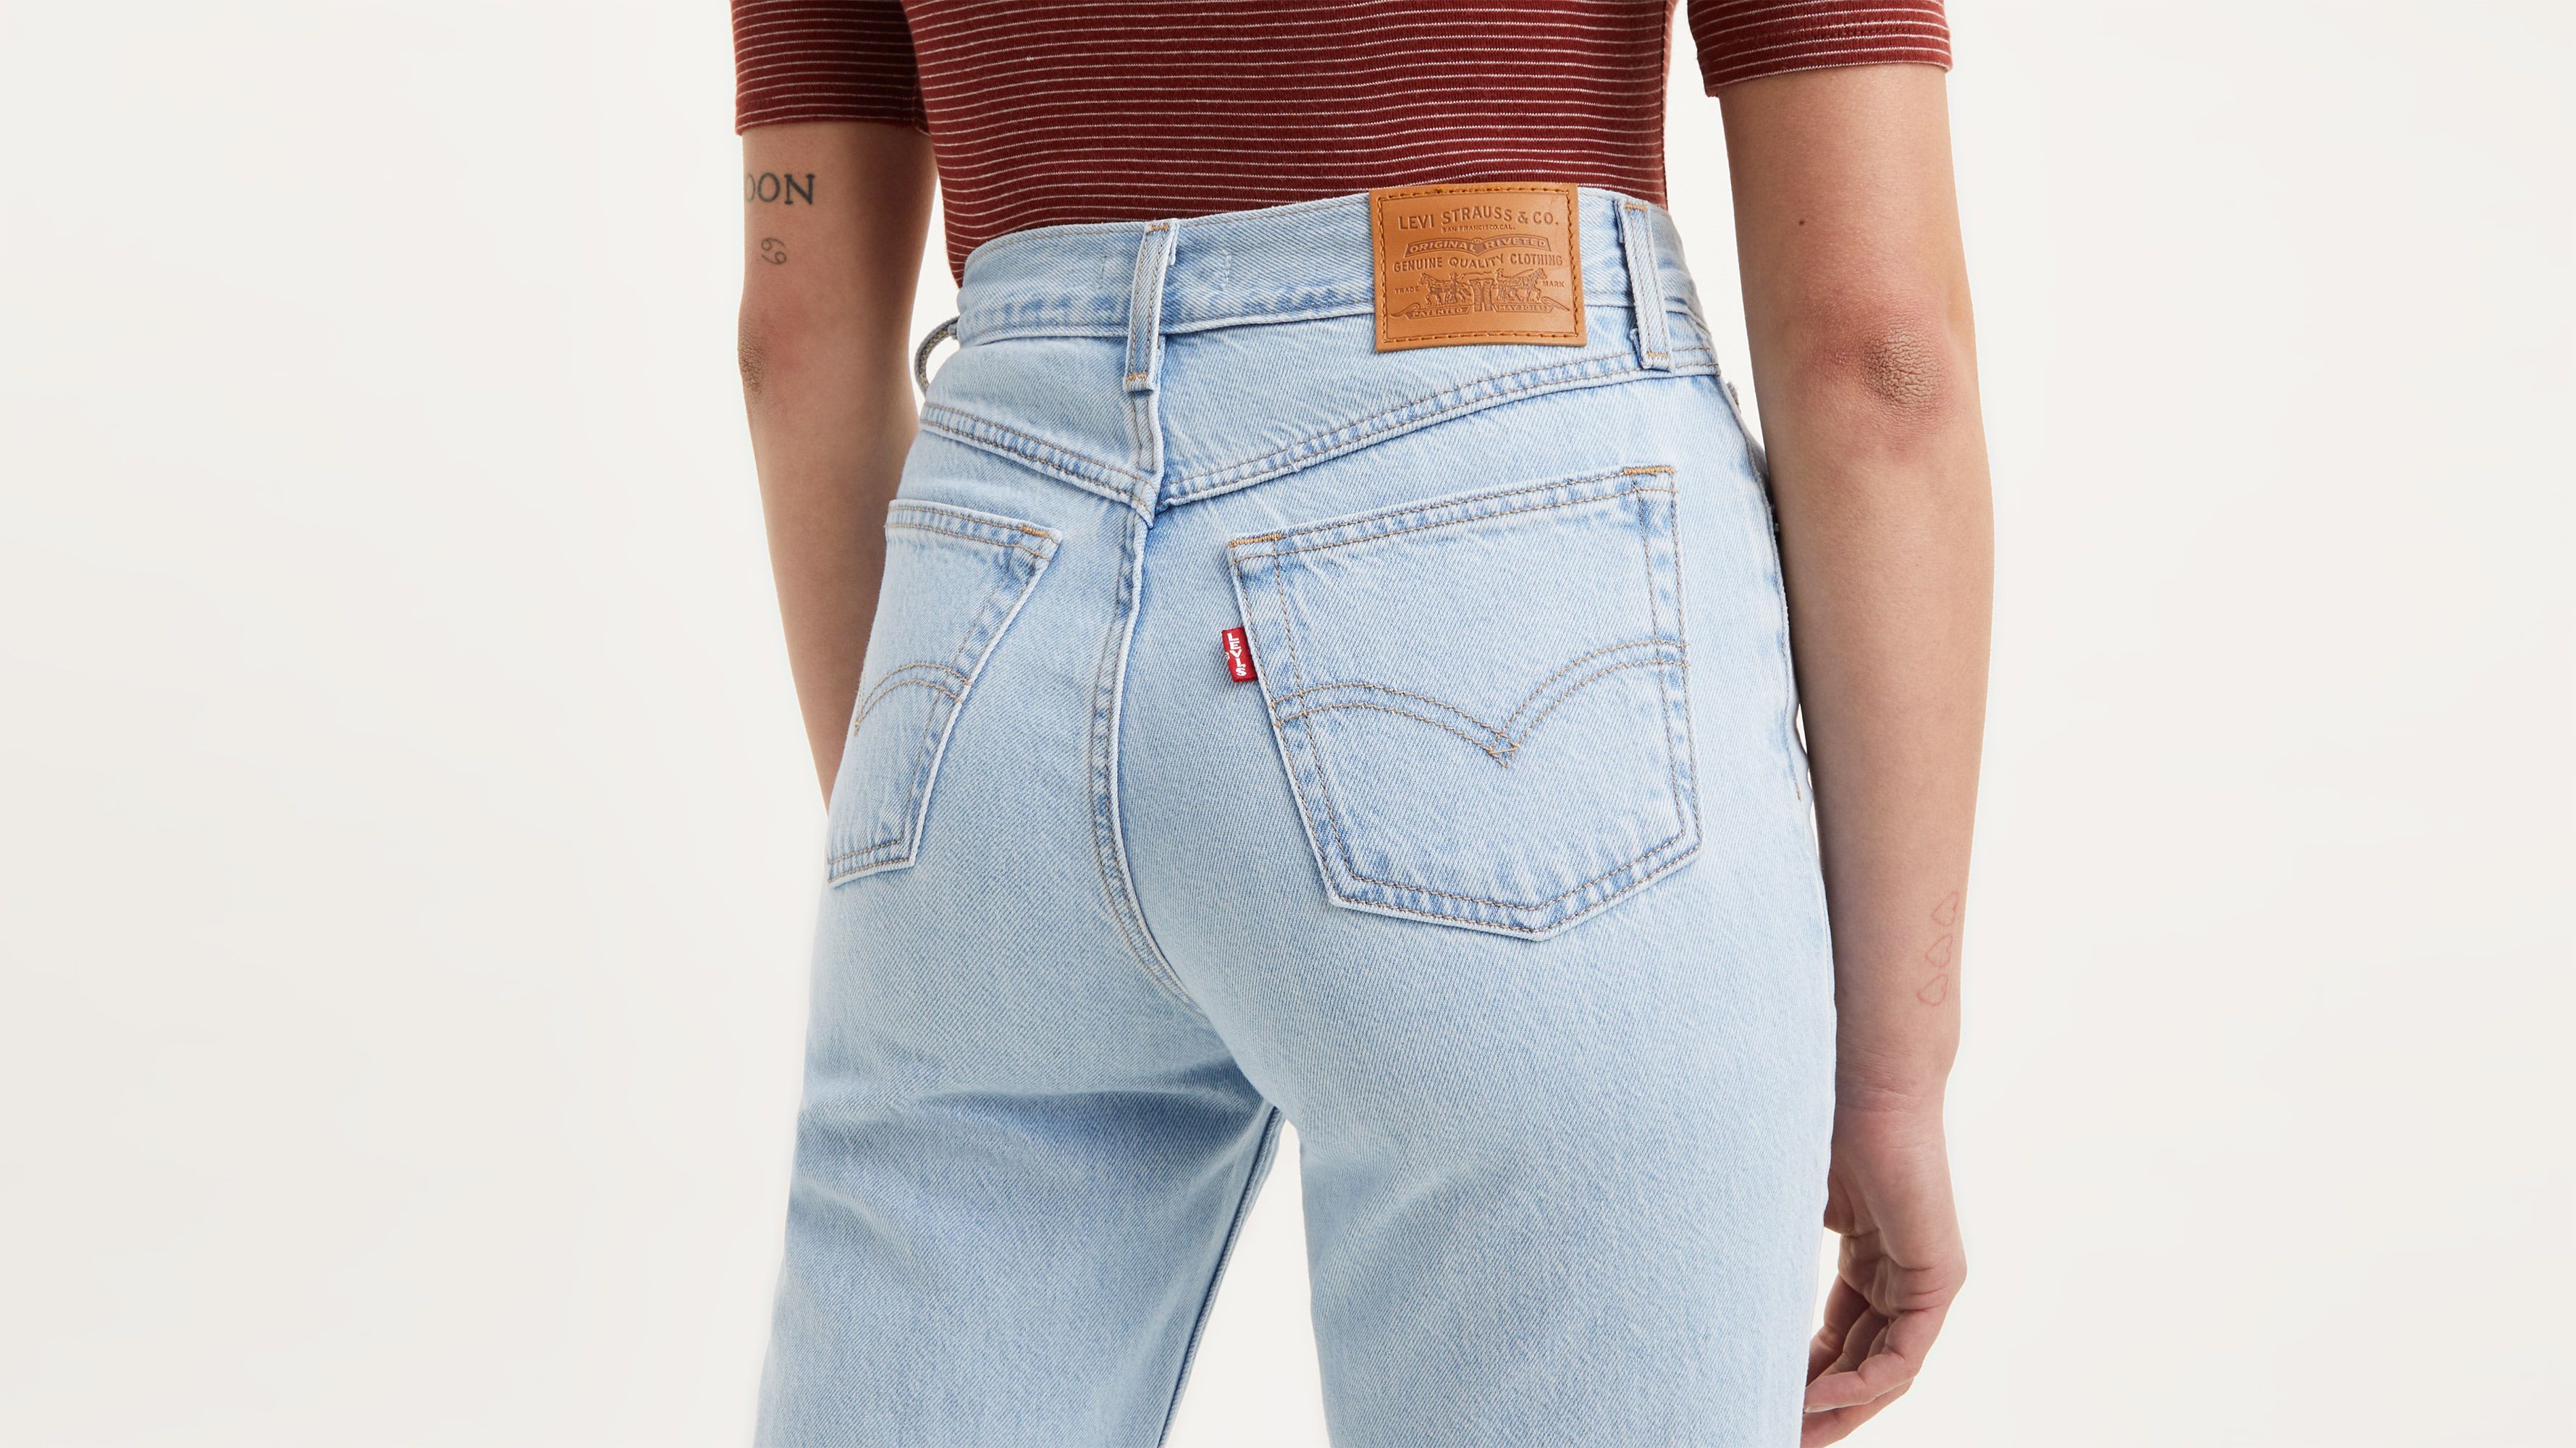 Levis 80S MOM JEAN Blue